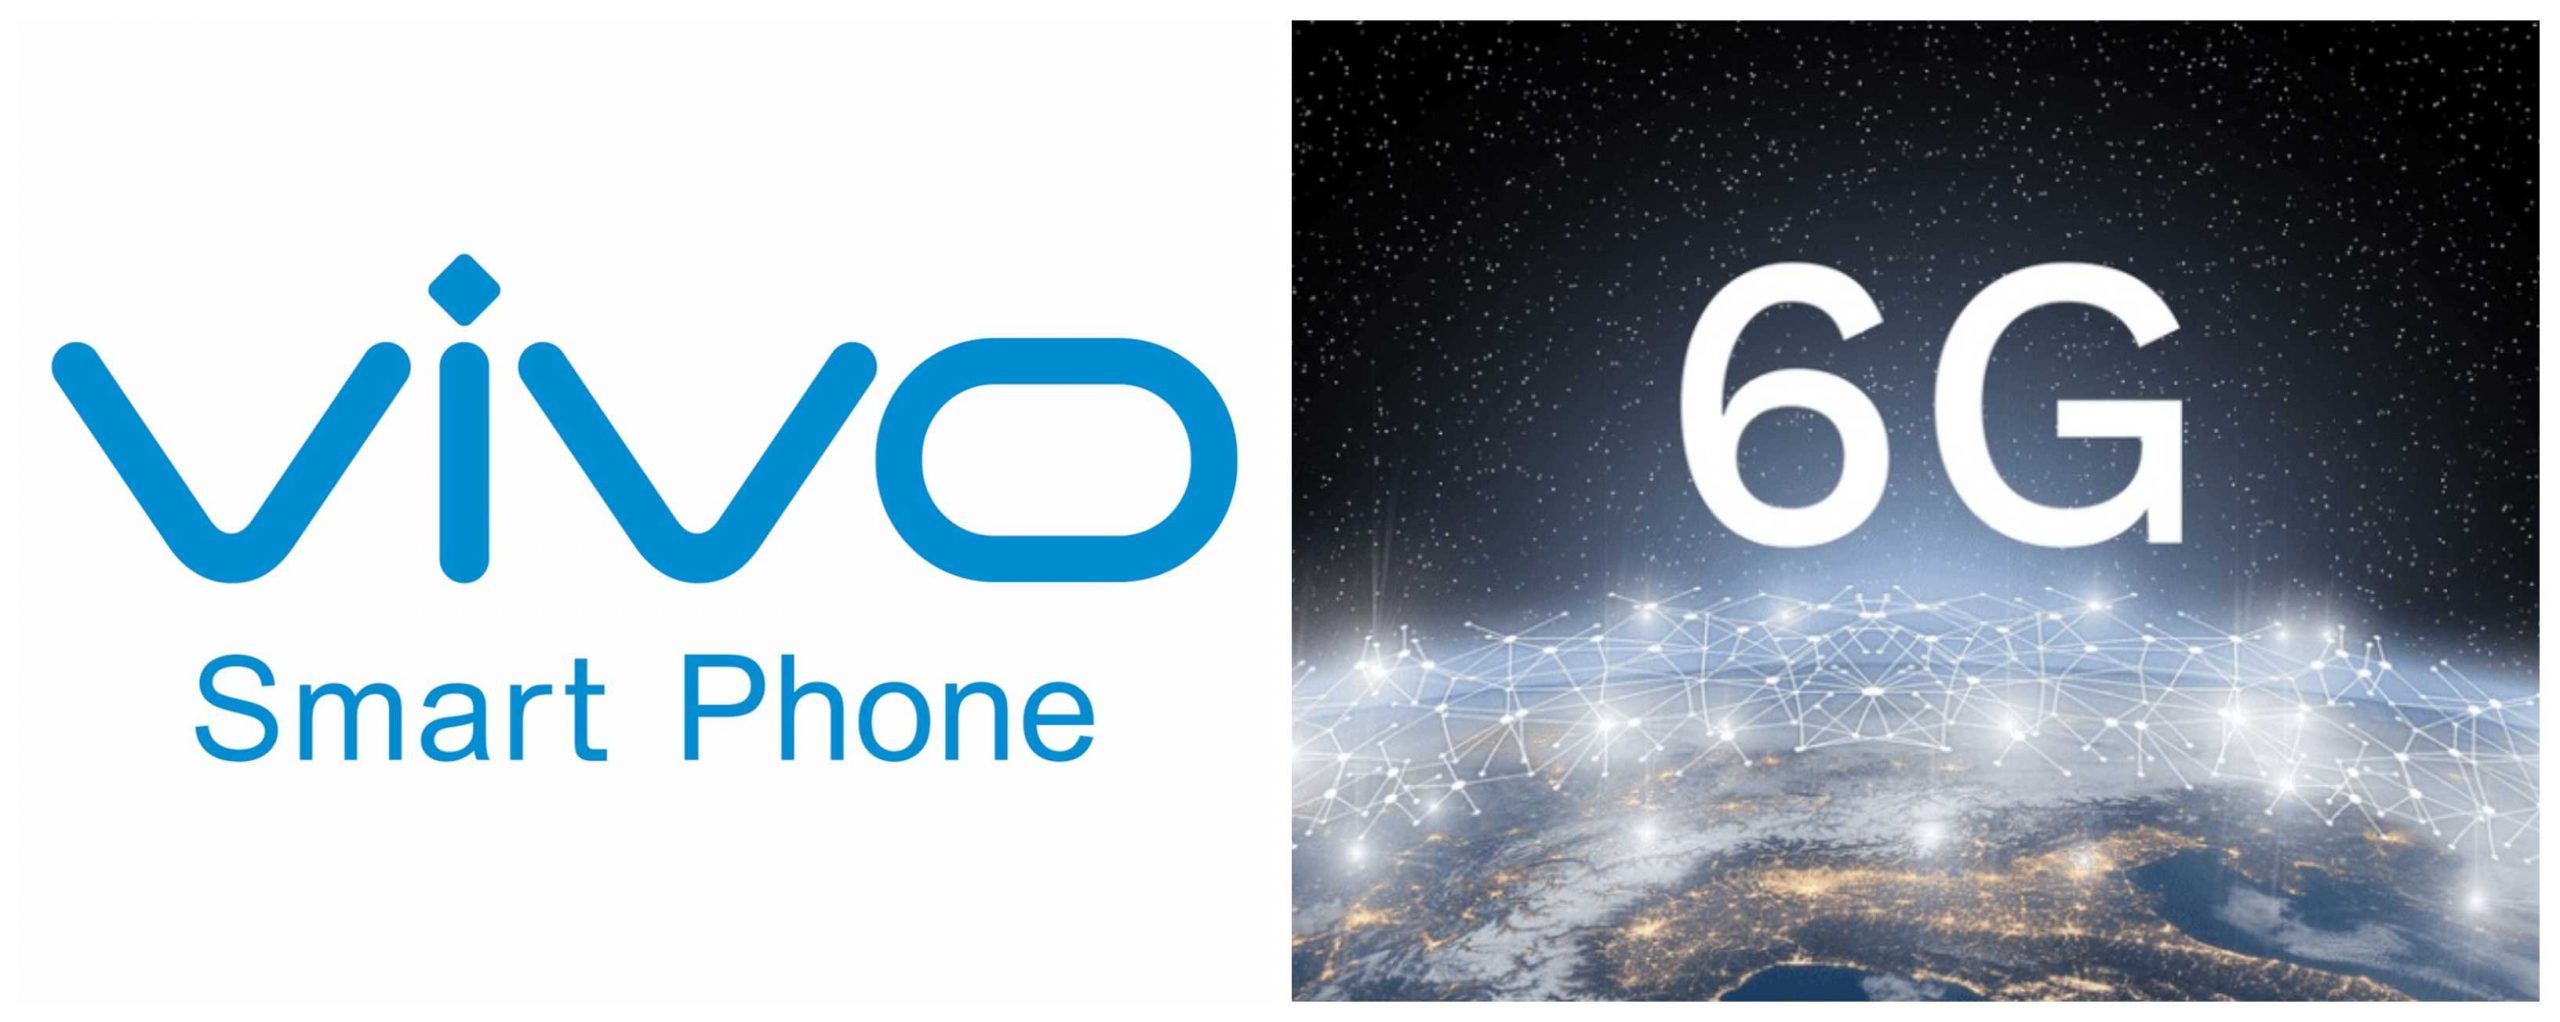 Vivo: Smartphones, AR/VR Glasses, and Robots will be inevitable in building a 6G network